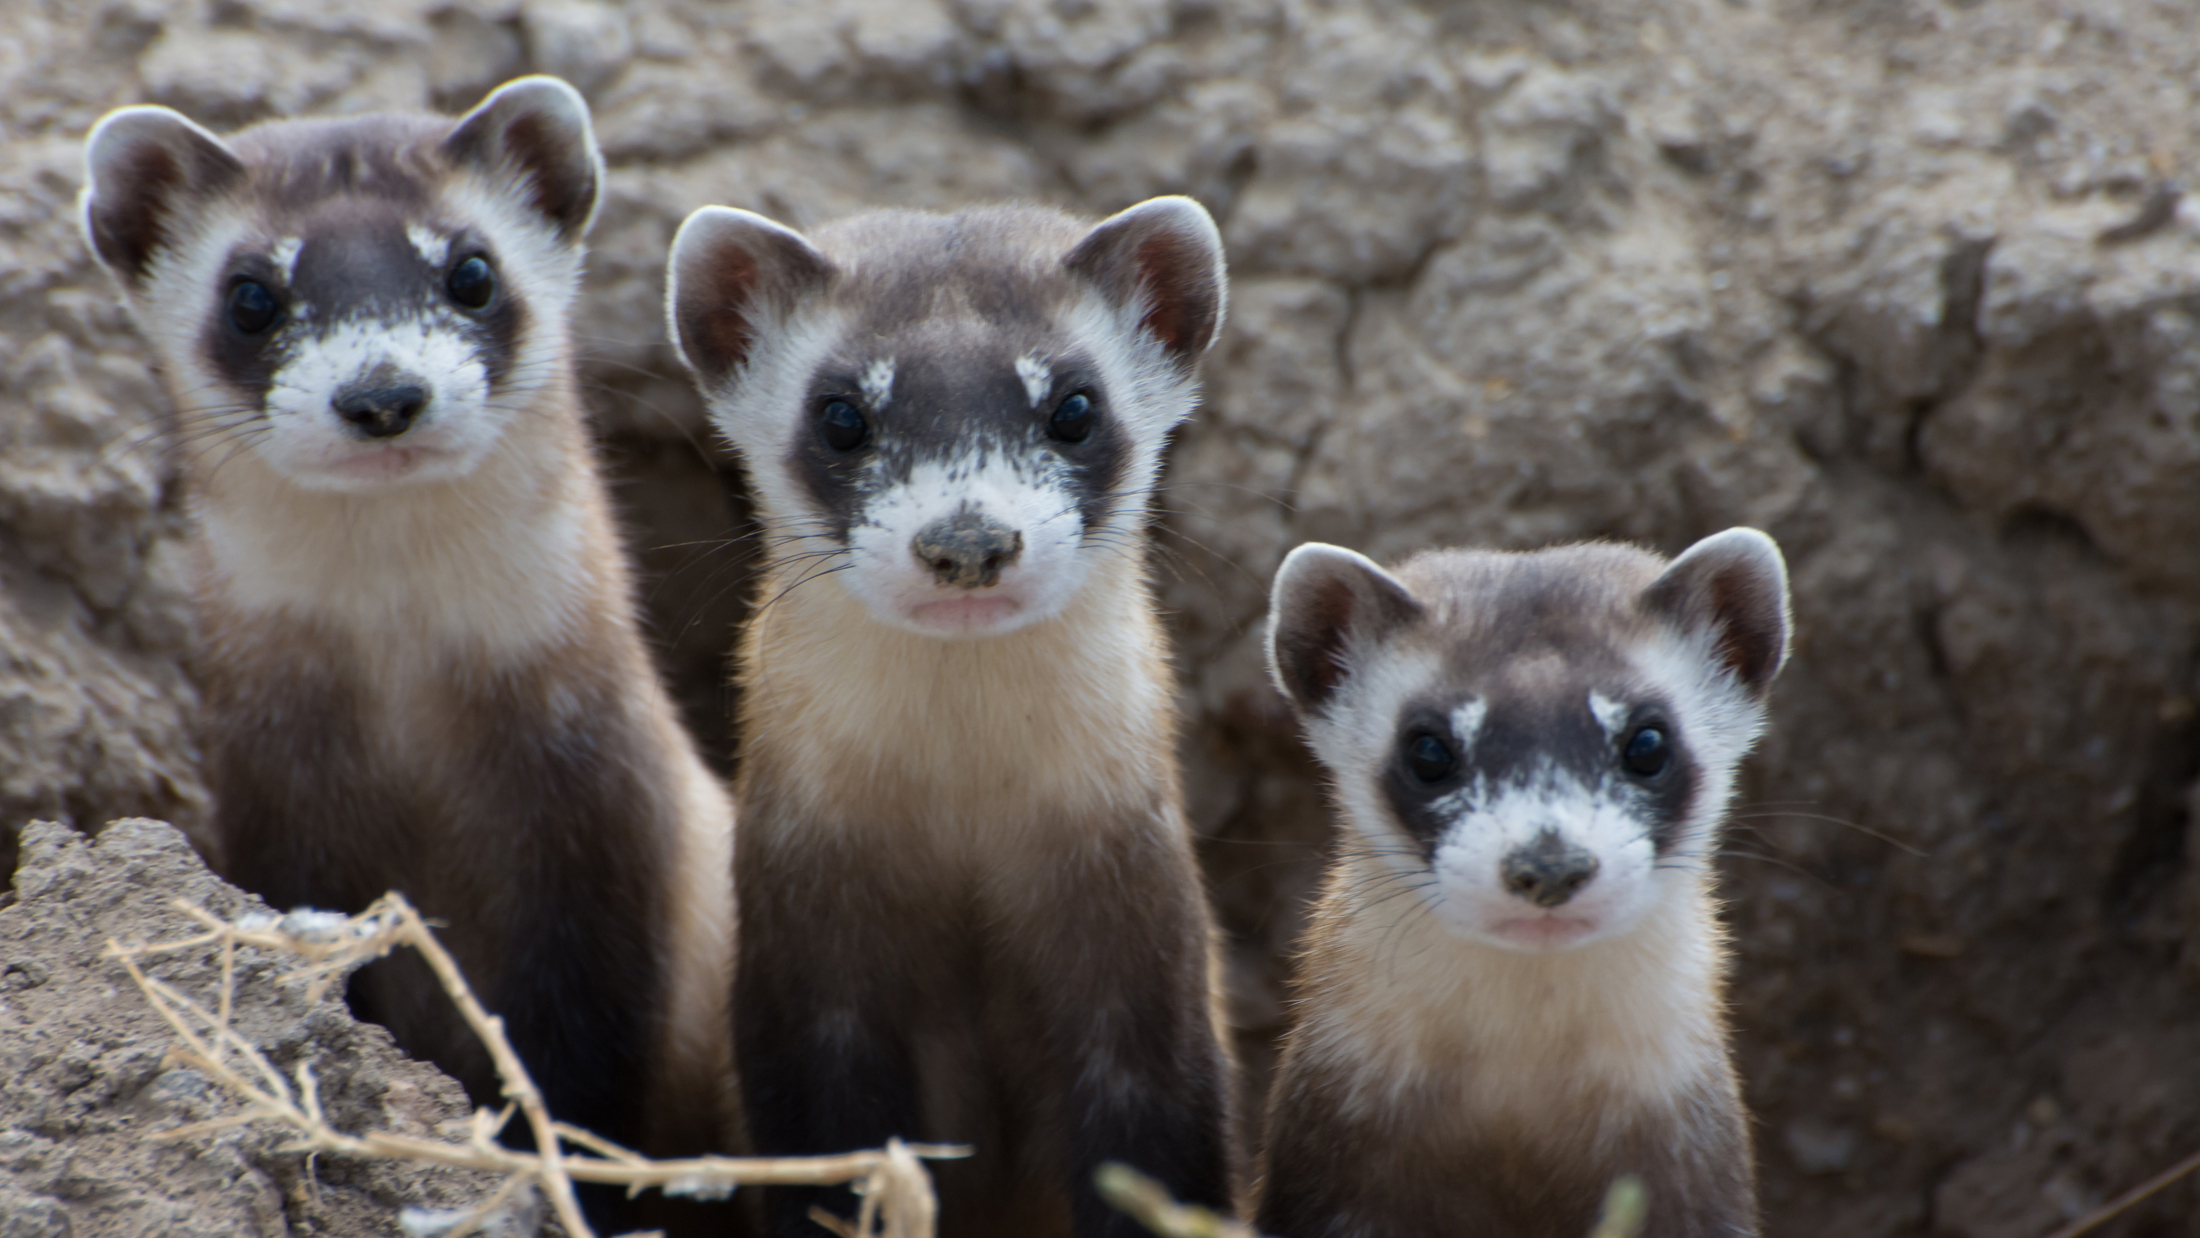 Recovery Hope for BlackFooted Ferrets, One of Our Most Endangered